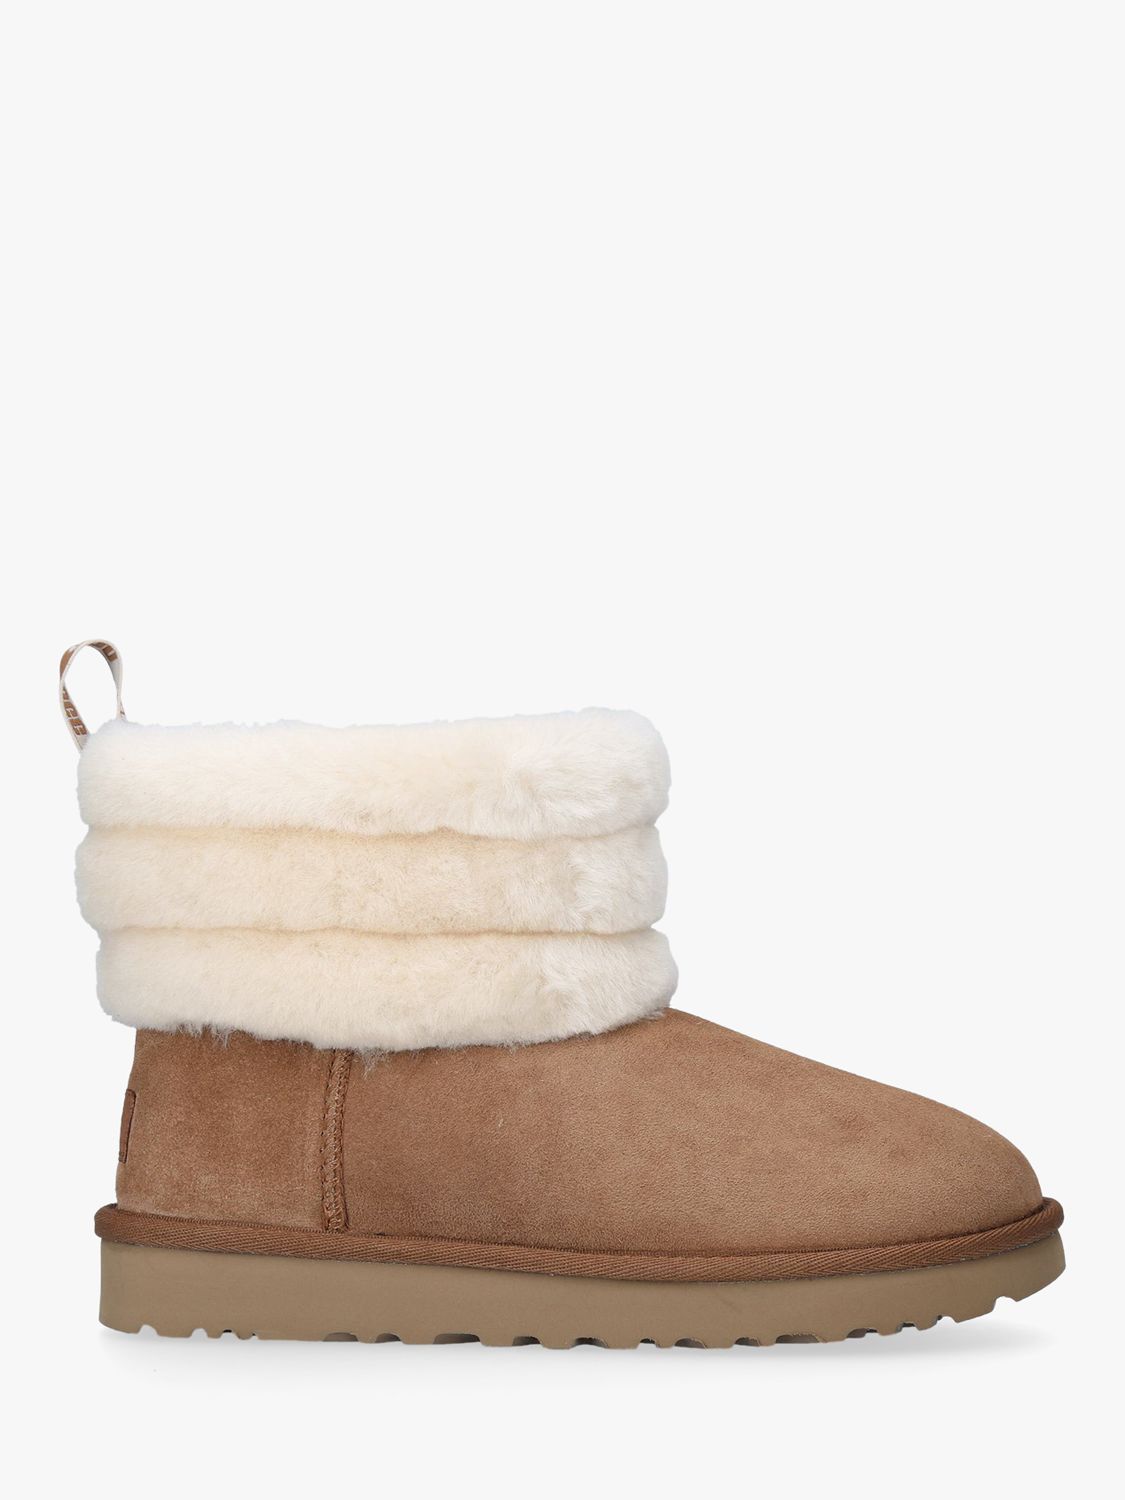 ugg boots next day delivery